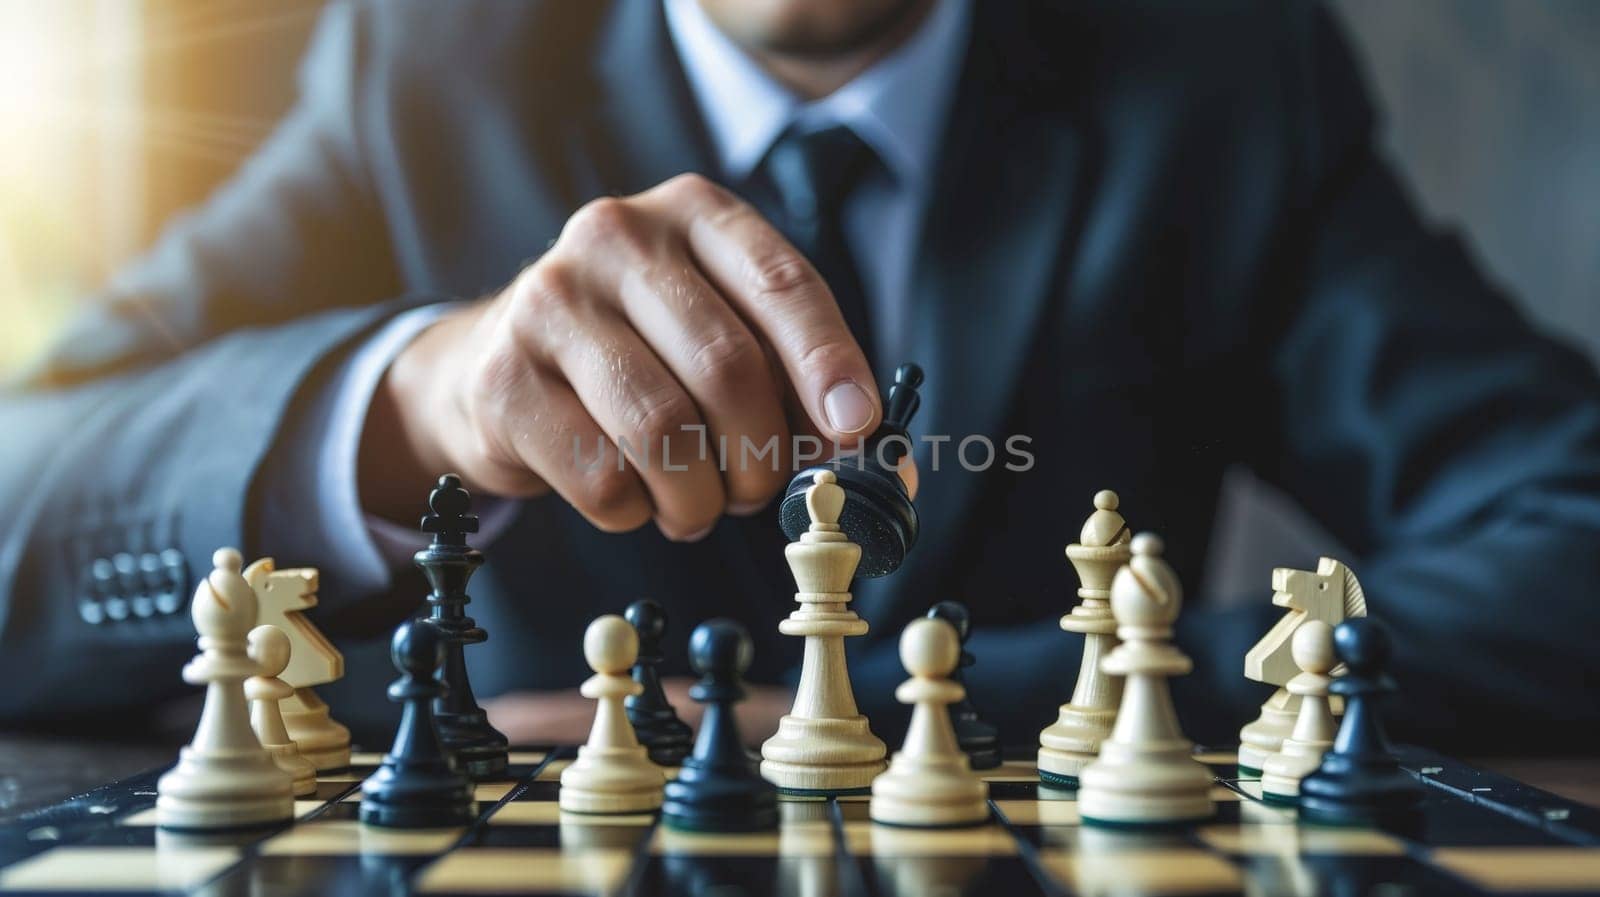 A man in a suit is playing chess with a white king. He is holding the king in his hand